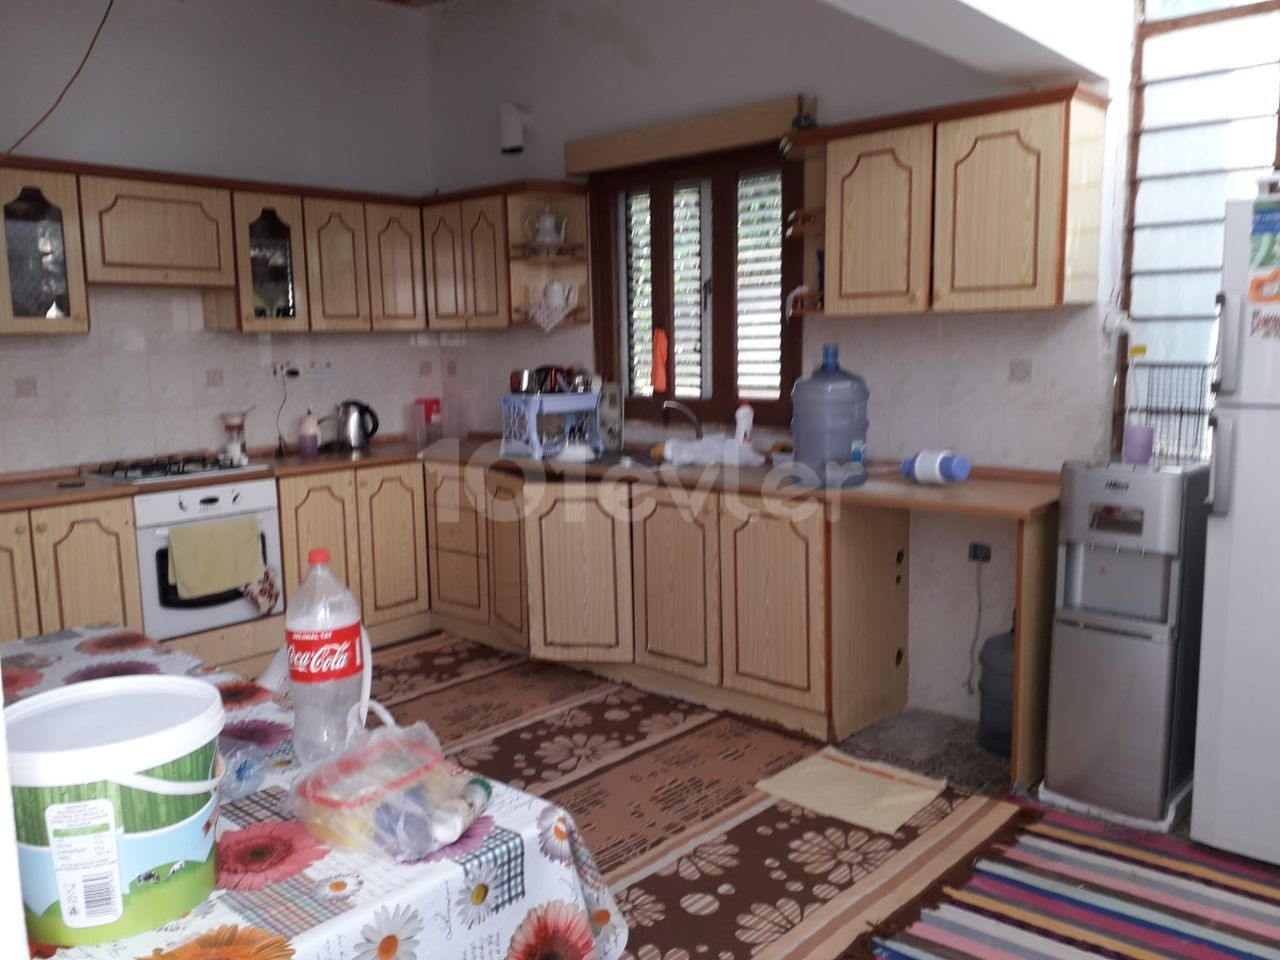 DETACHED PLACE HOUSE WITH GARDEN FOR SALE IN FAMAGUSTA MARAŞ REGION AT AFFORDABLE PRICE (0533 871 6180)